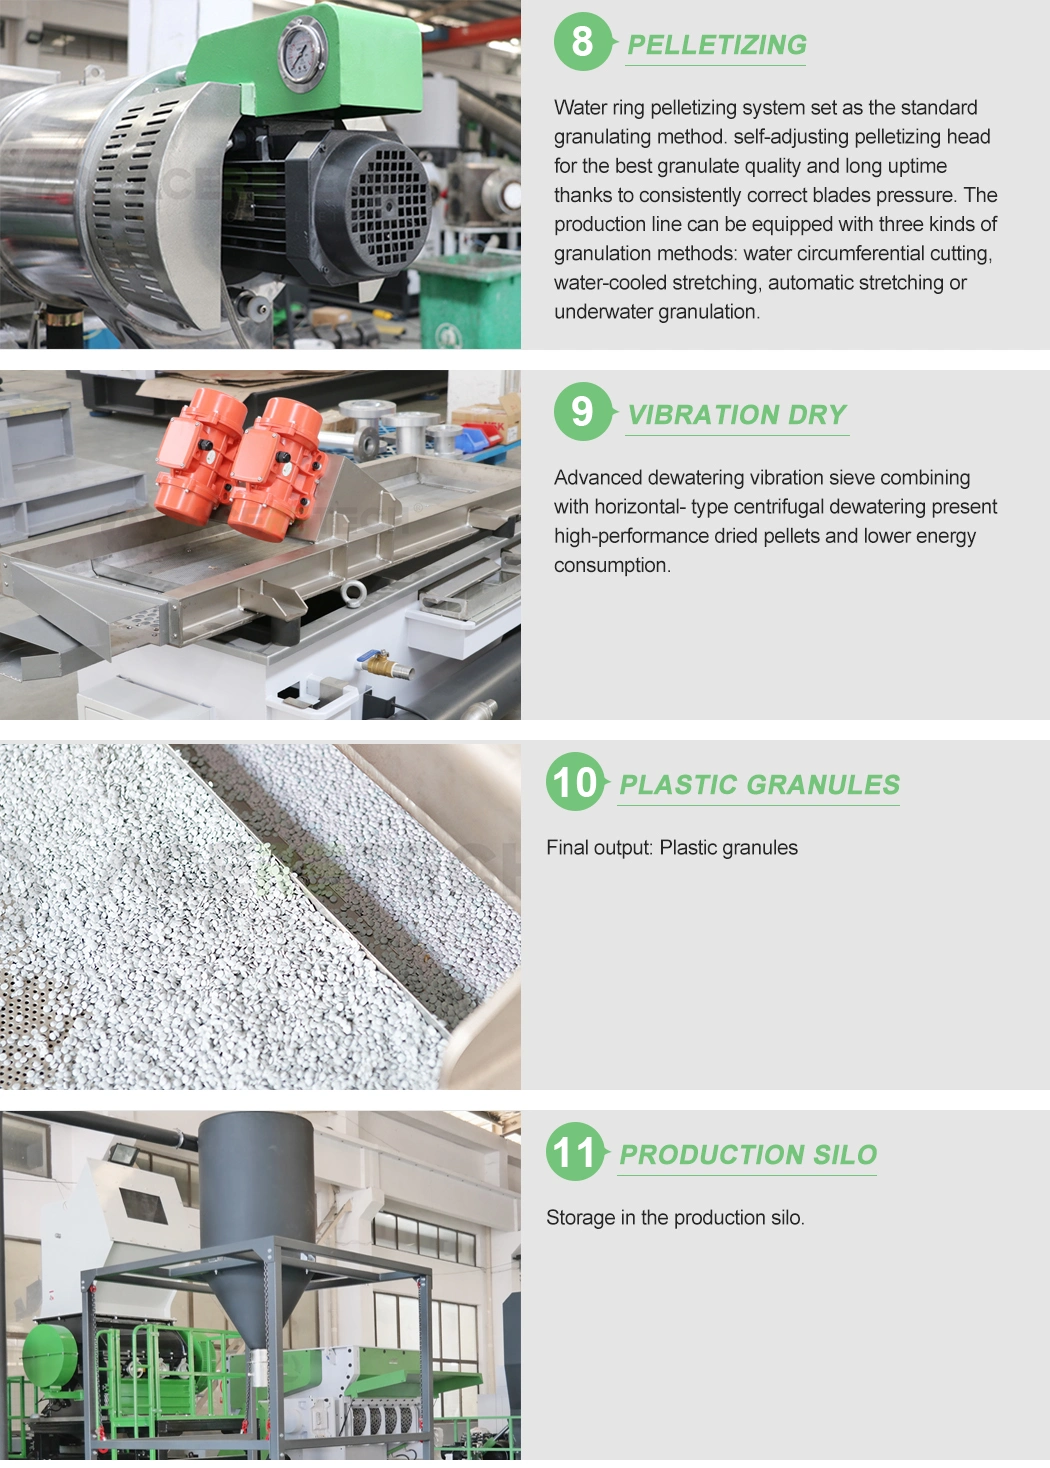 Industrial Waste HDPE LDPE Film Plastic Bags Recycling Machine Plant